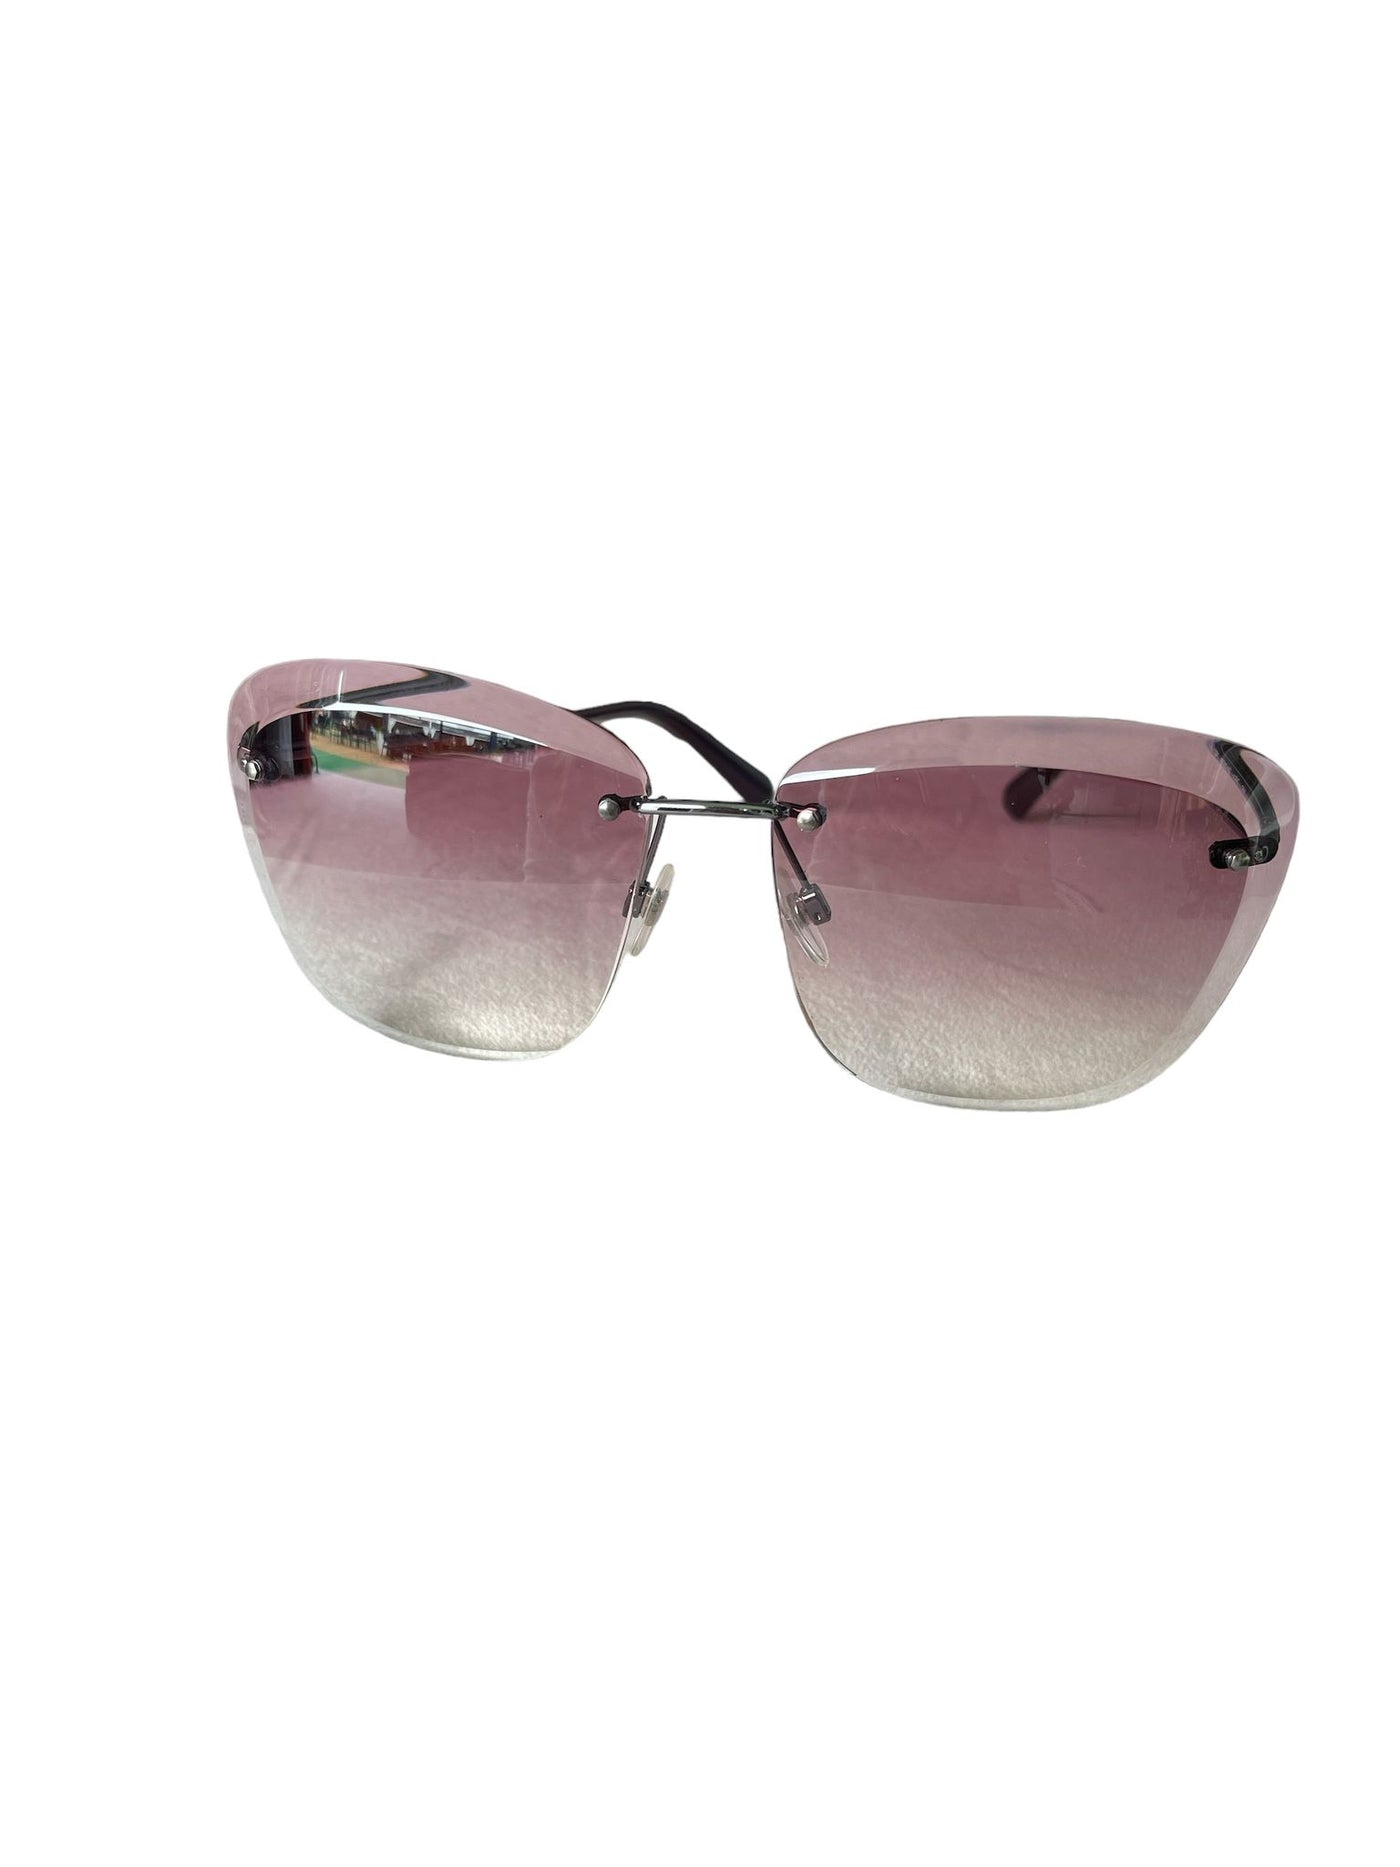 Chanel Butterfly Spring Gradient Sunglasses pink